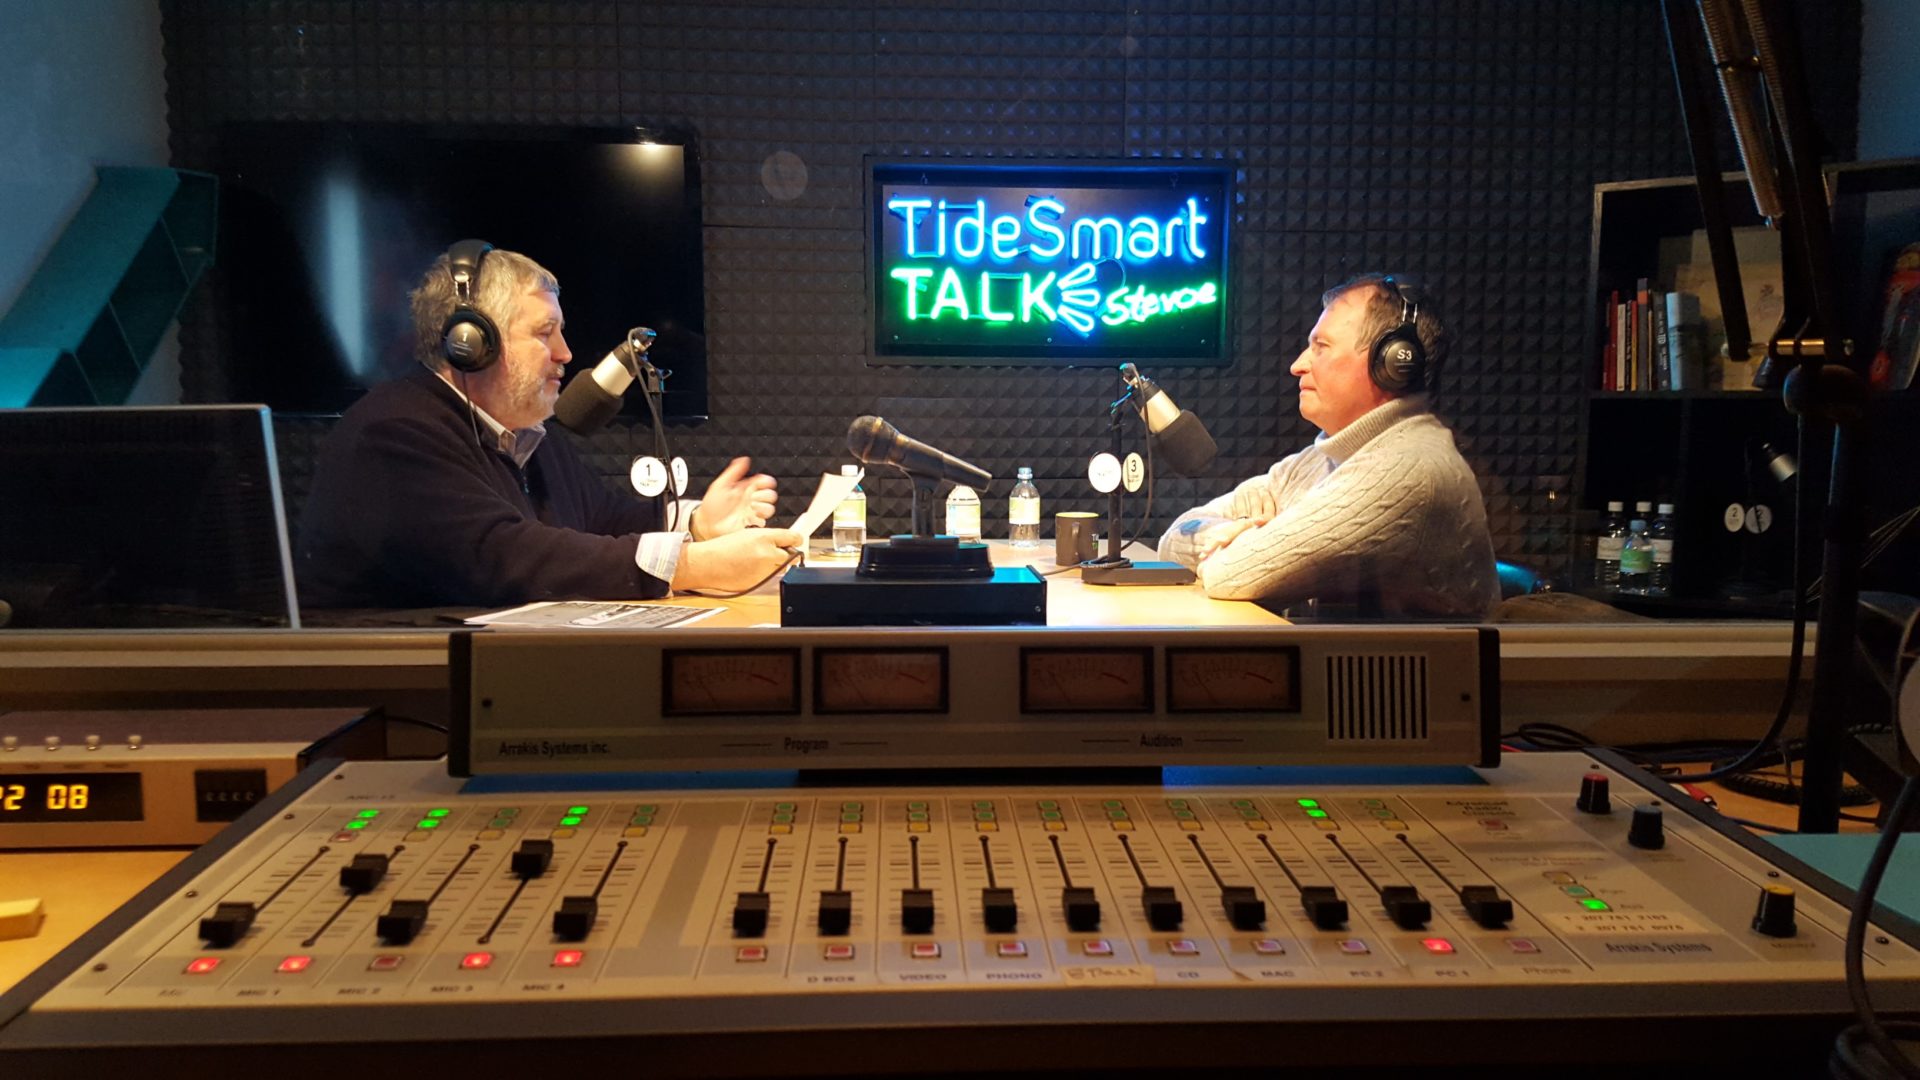 Host of TideSmart Talk with Stevoe, Steve Woods, welcomed Author, Paul Doiron (at right).